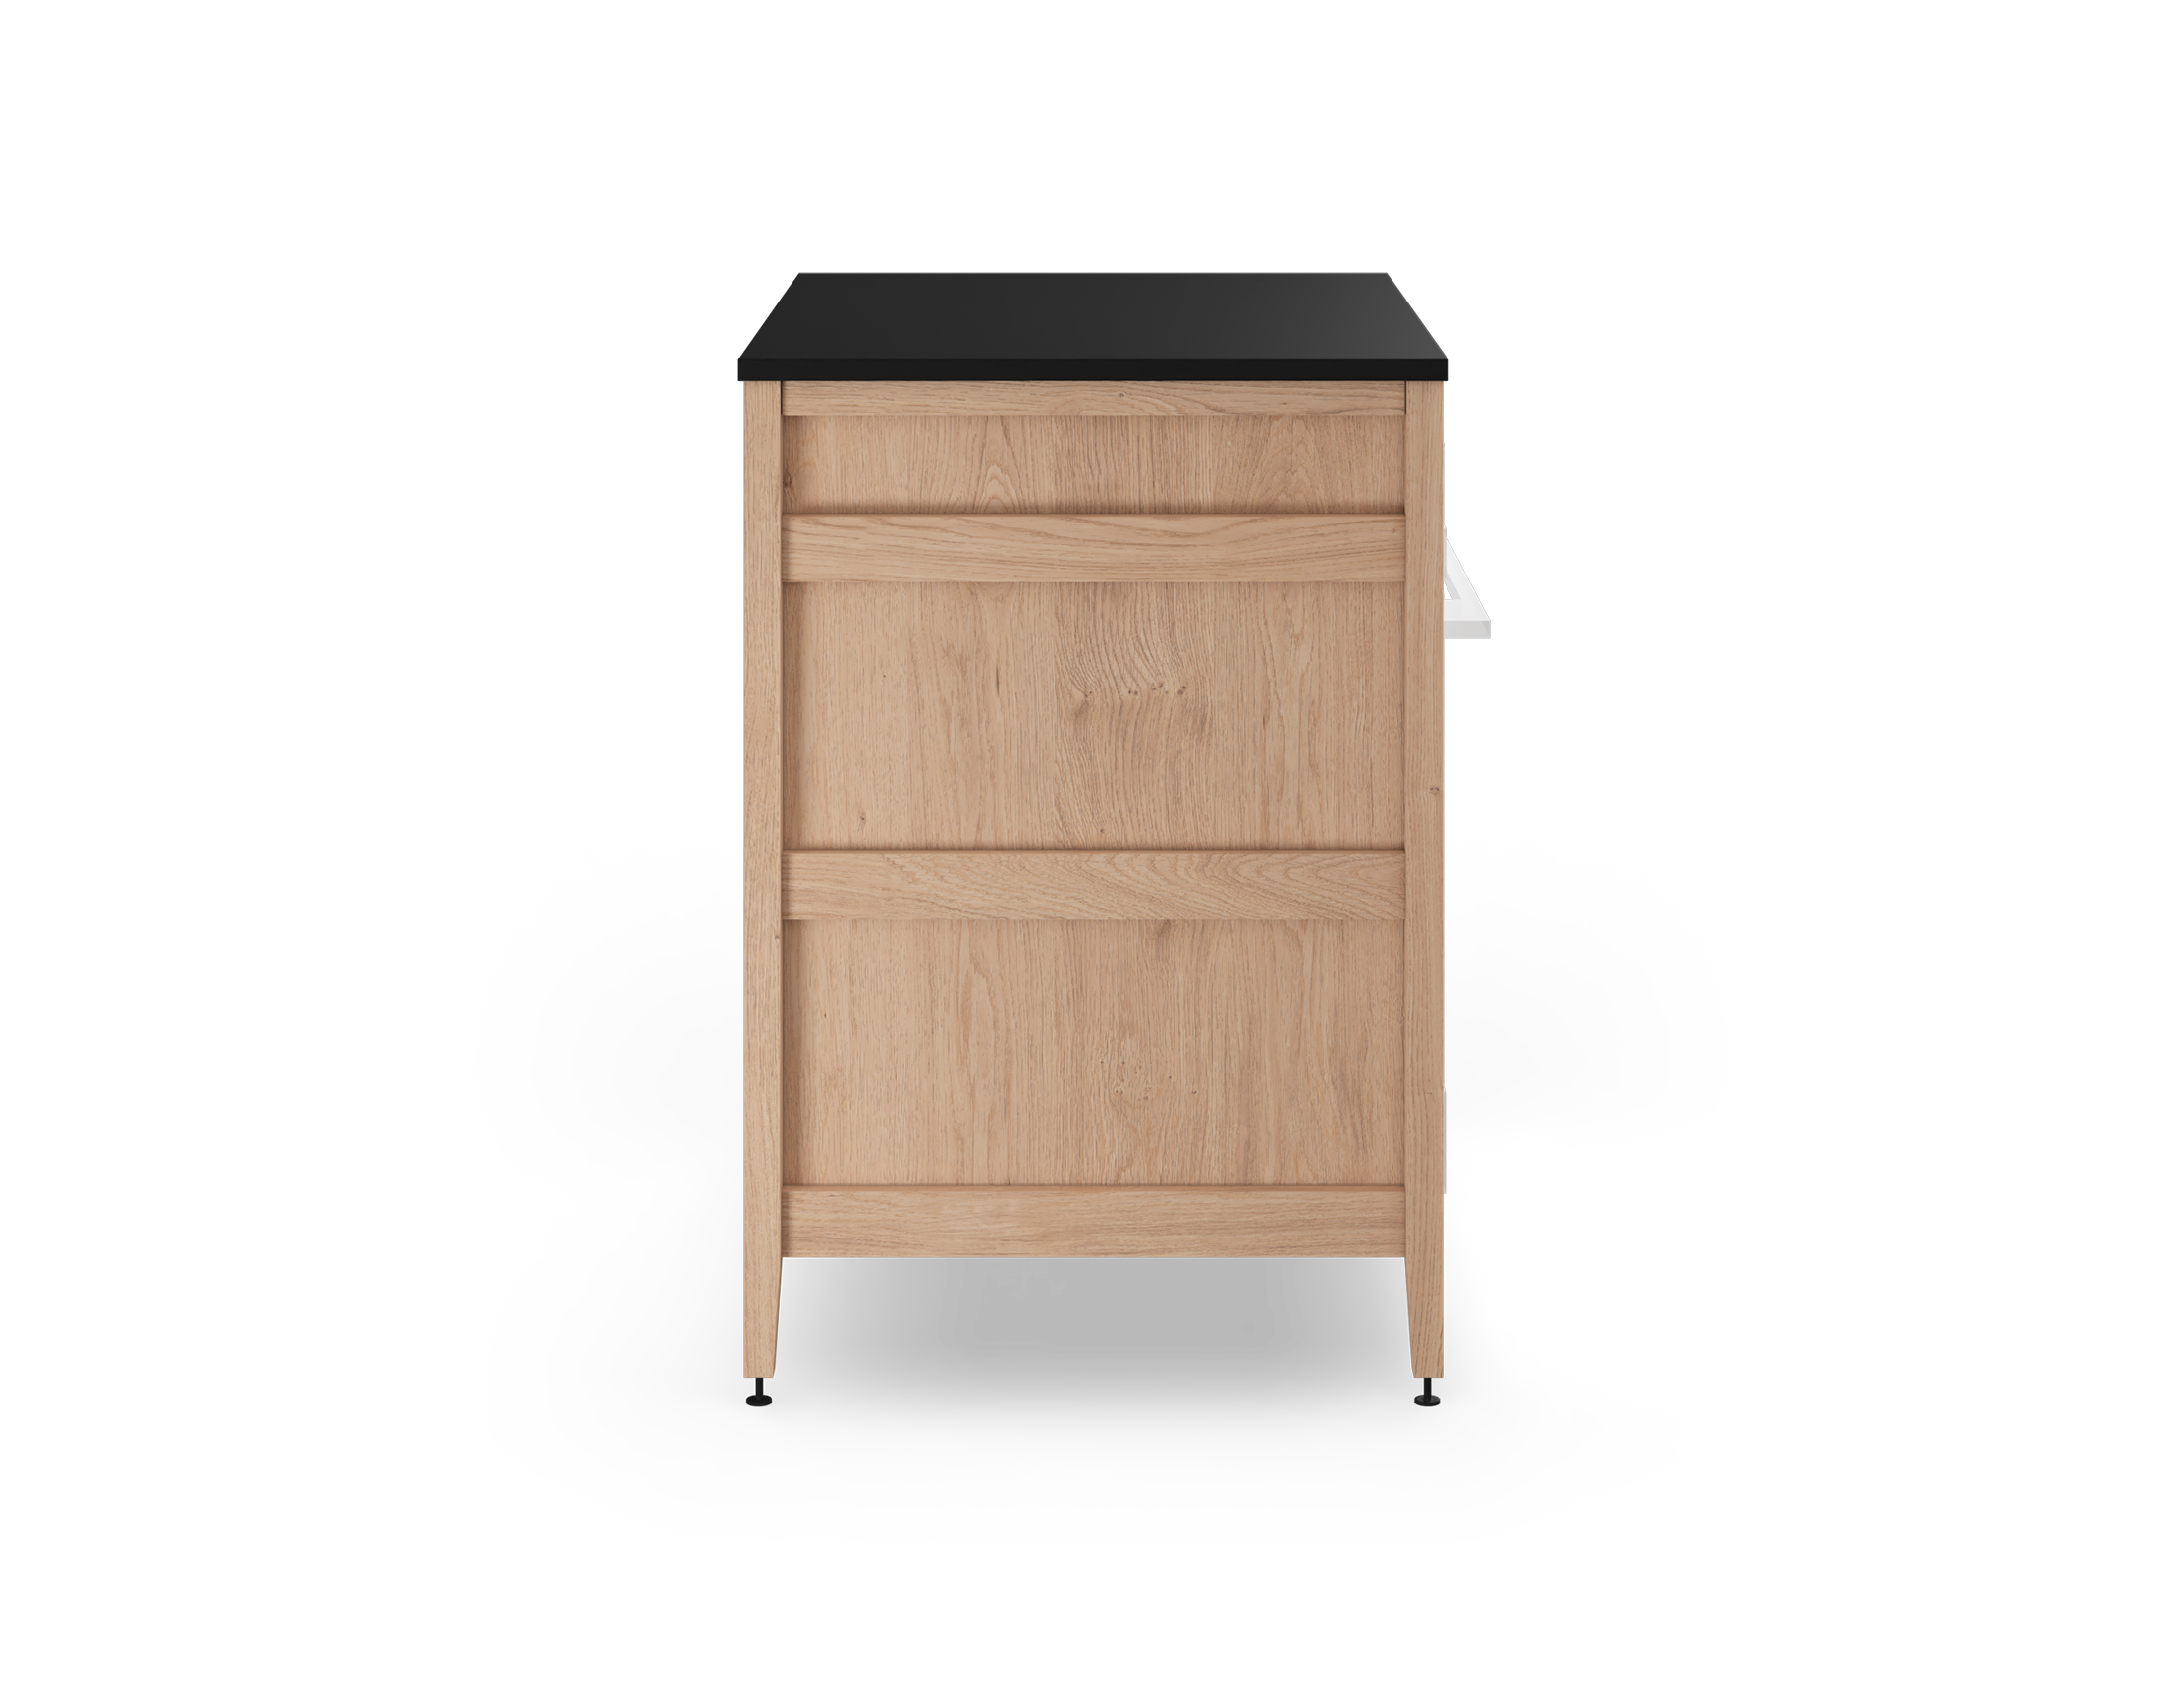 Coquo modular freestanding oven cabinet for the kitchen in natural oak. 